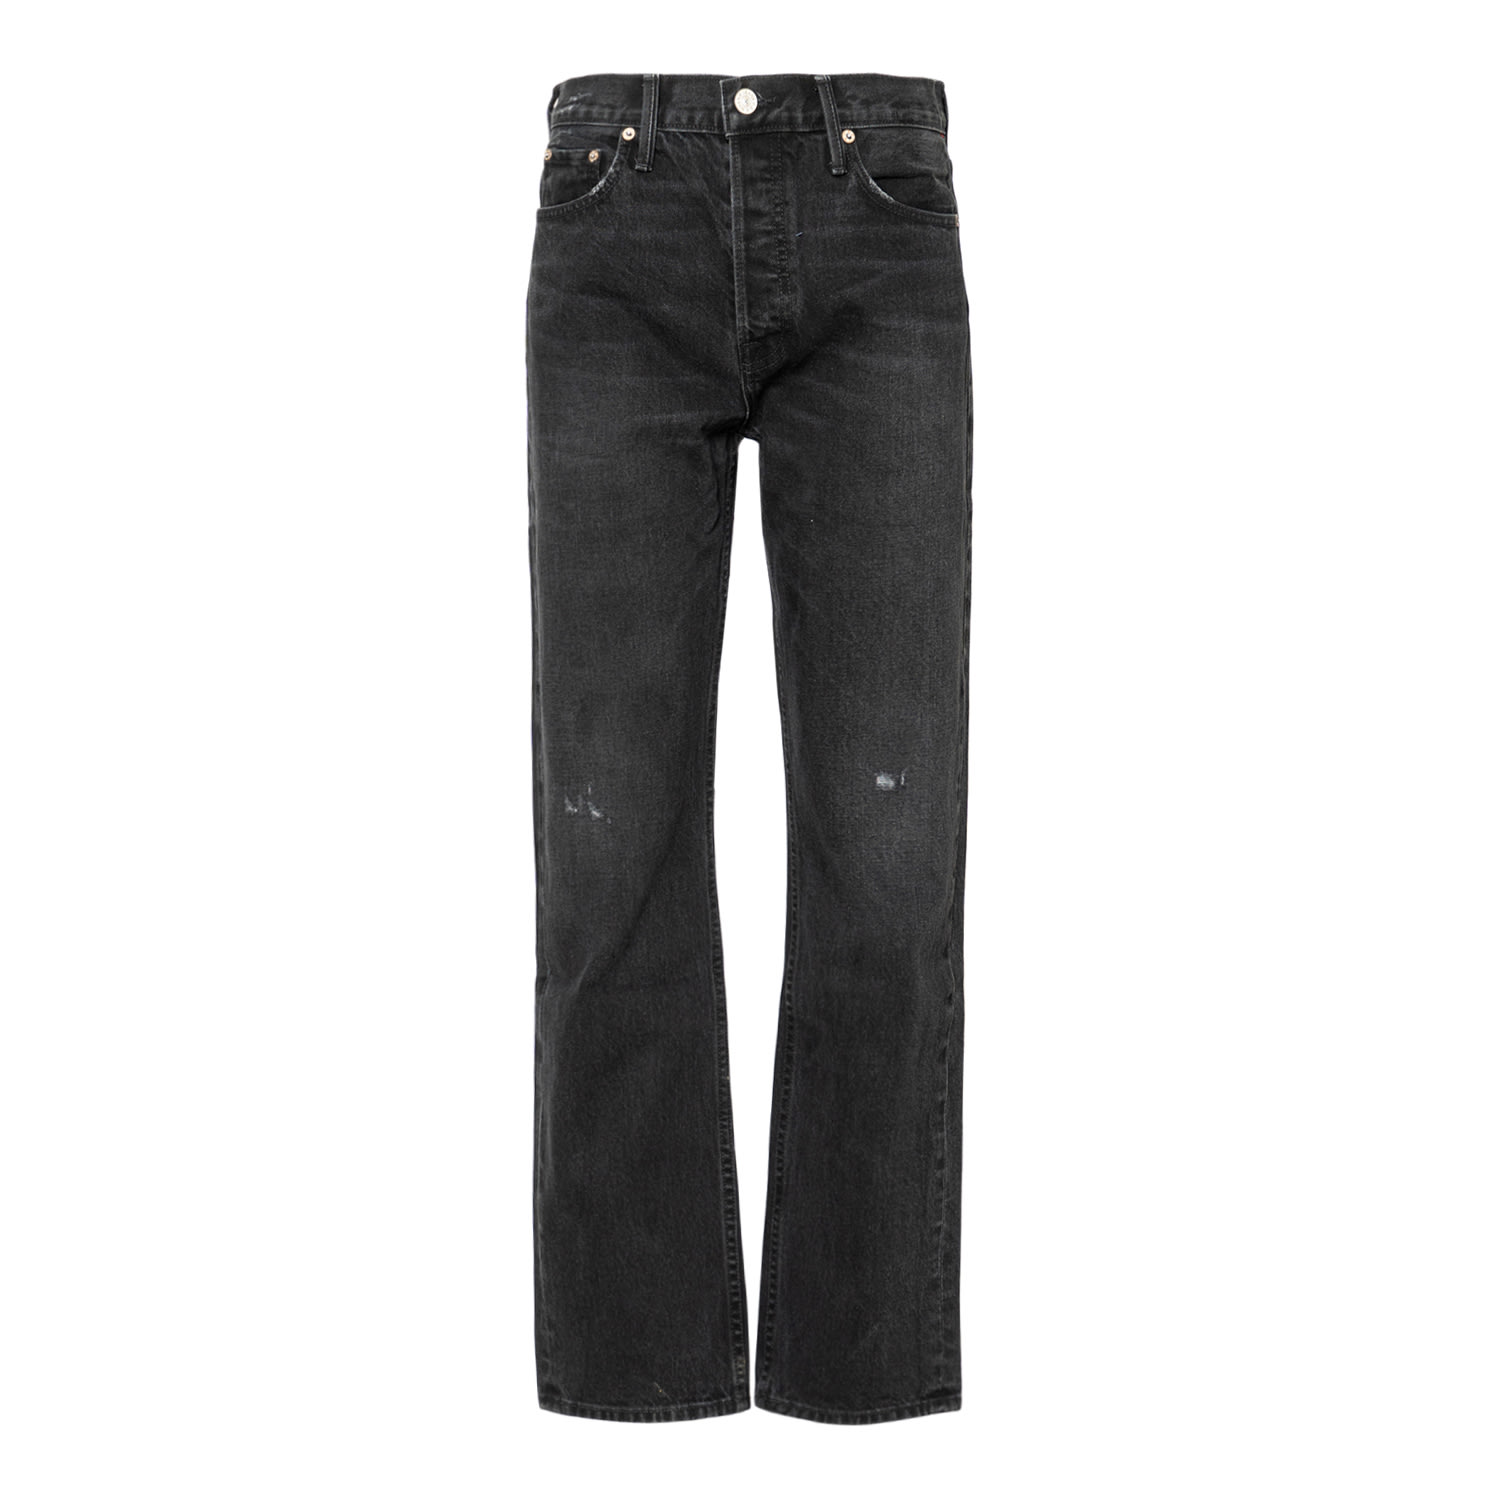 Noend Denim Black Kent Relaxed Straight Jeans In Michigan